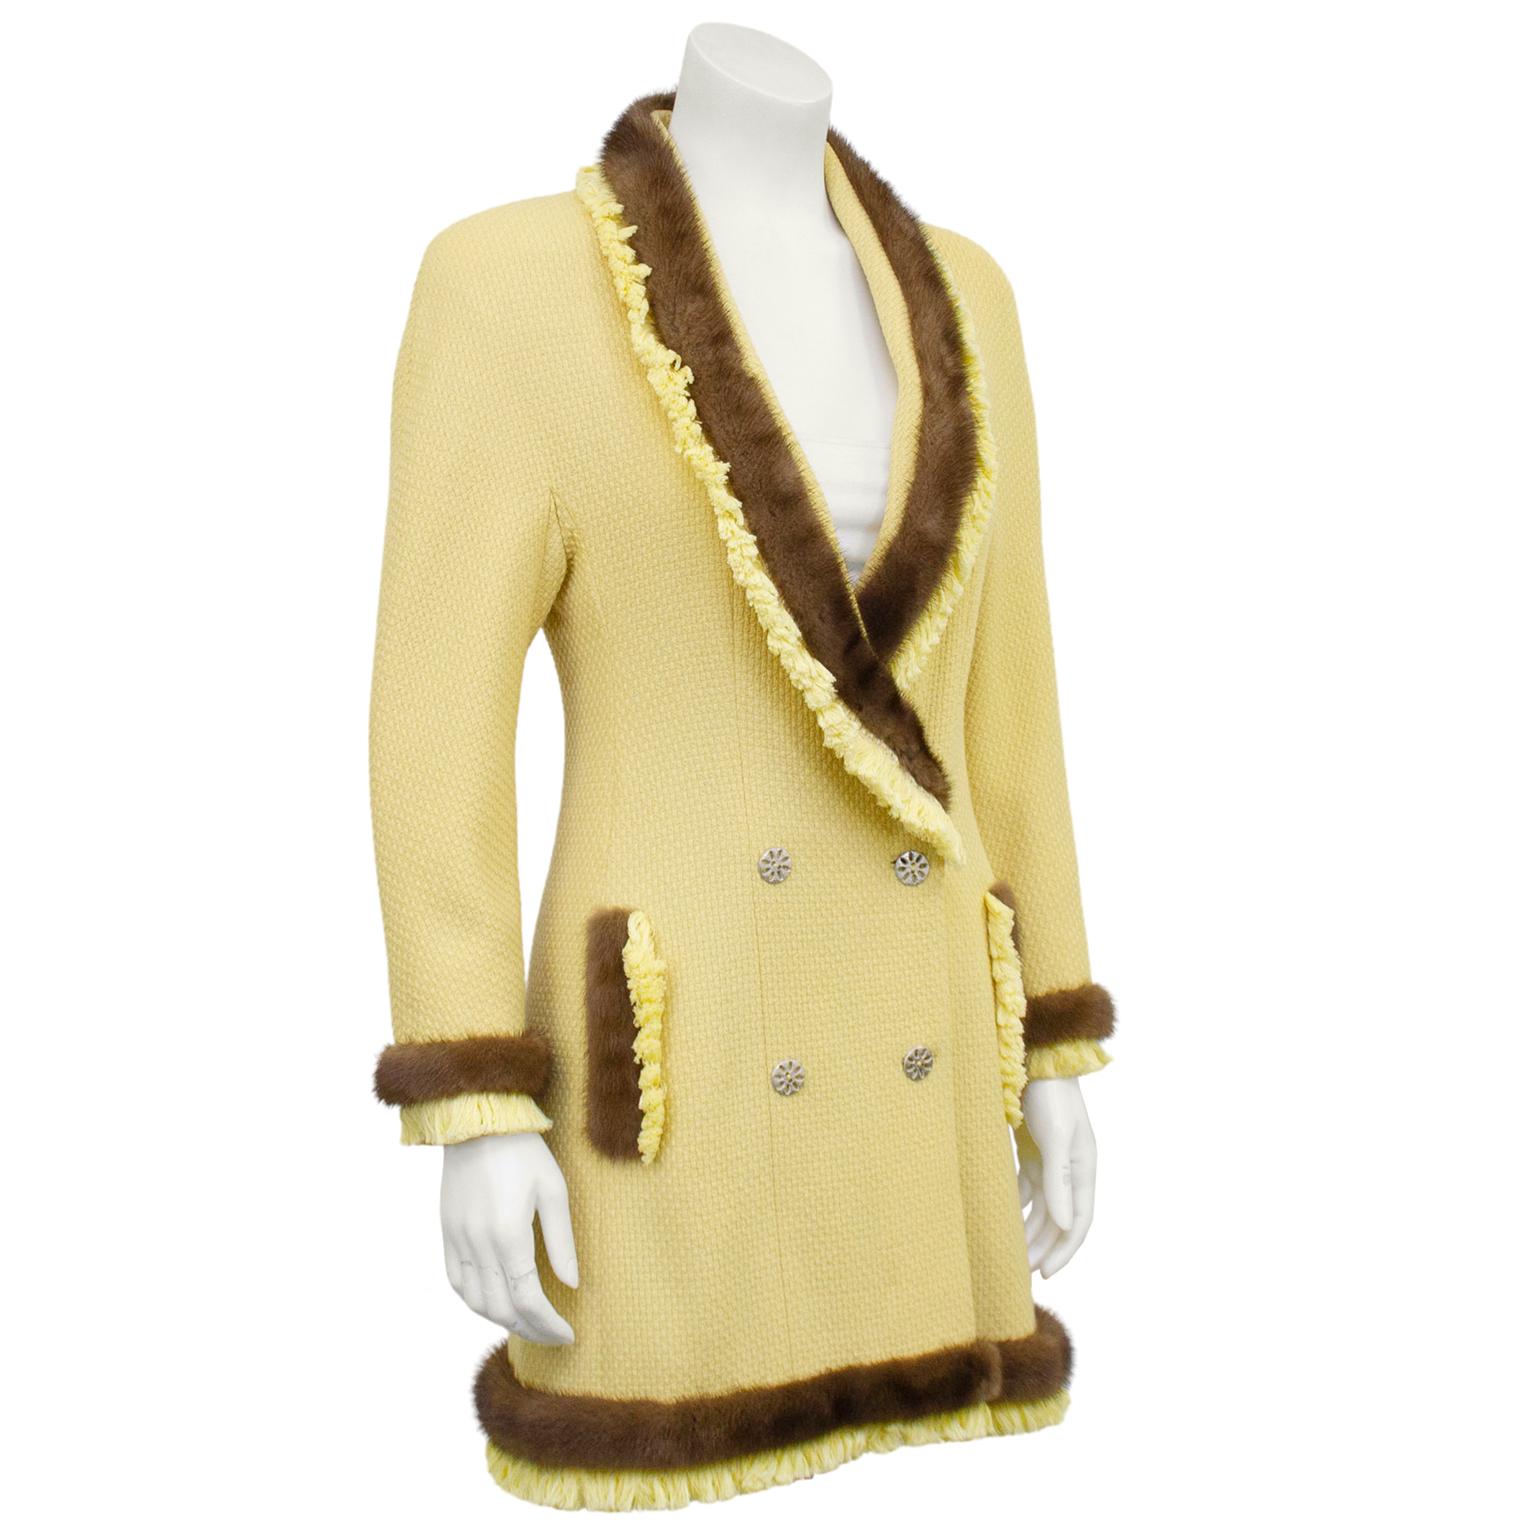 The most amazing 1990's Christian Dior Boutique long jacket. Pale yellow bouclé trimmed in rich contrasting brown mink and matching yellow fringe. Deep shawl collar and double breasted silver metal floral buttons. Yellow satin lining. Excellent